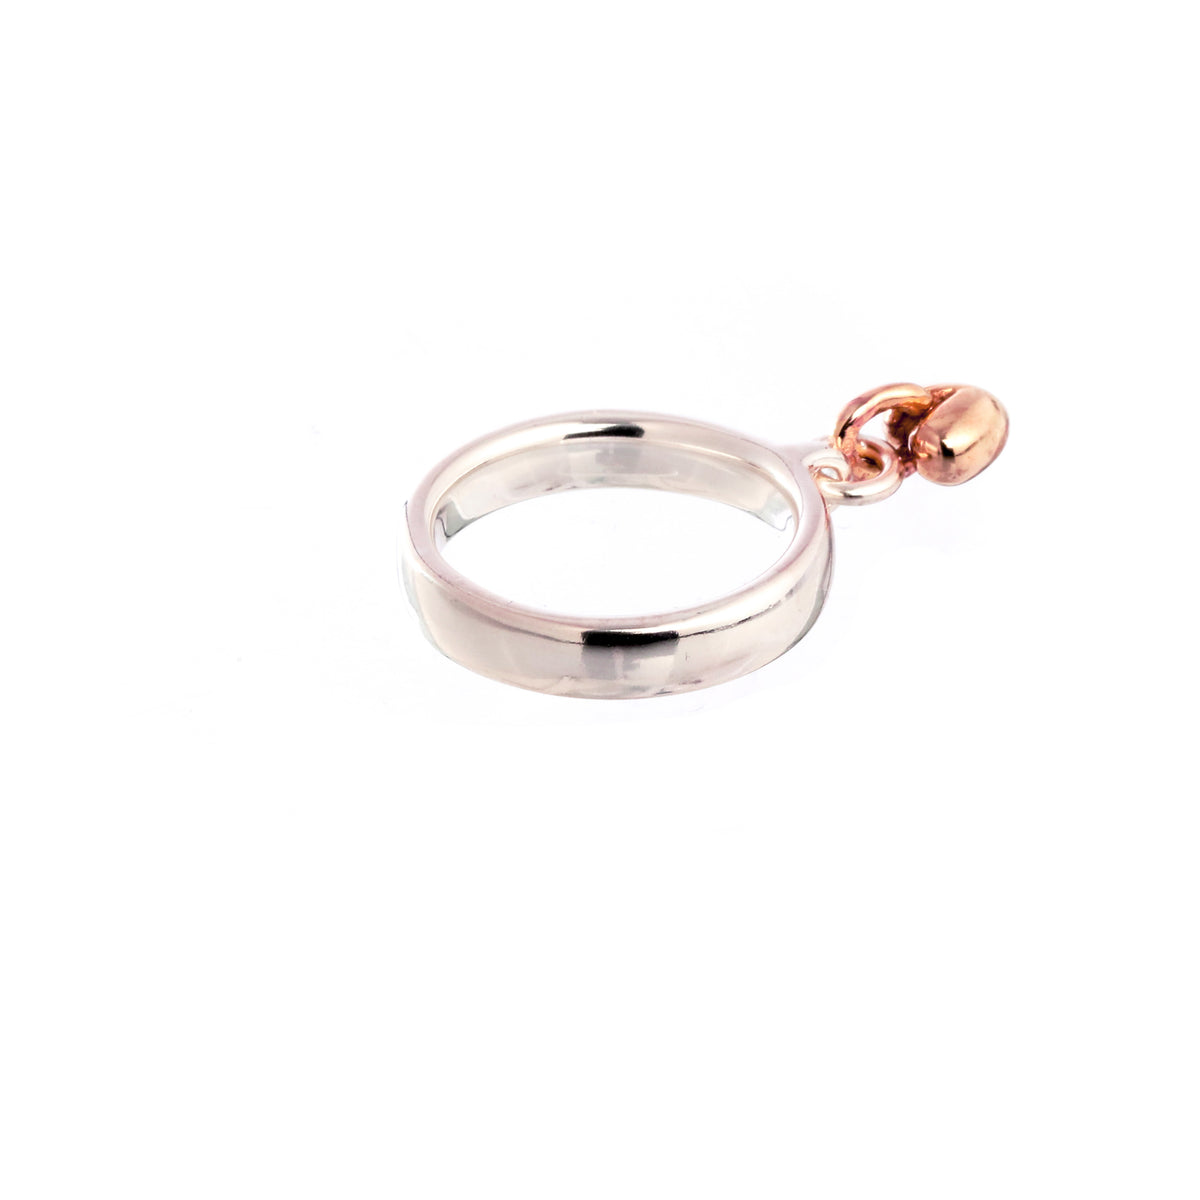 Sweetheart Silver &amp; Rose Gold Charm Ring